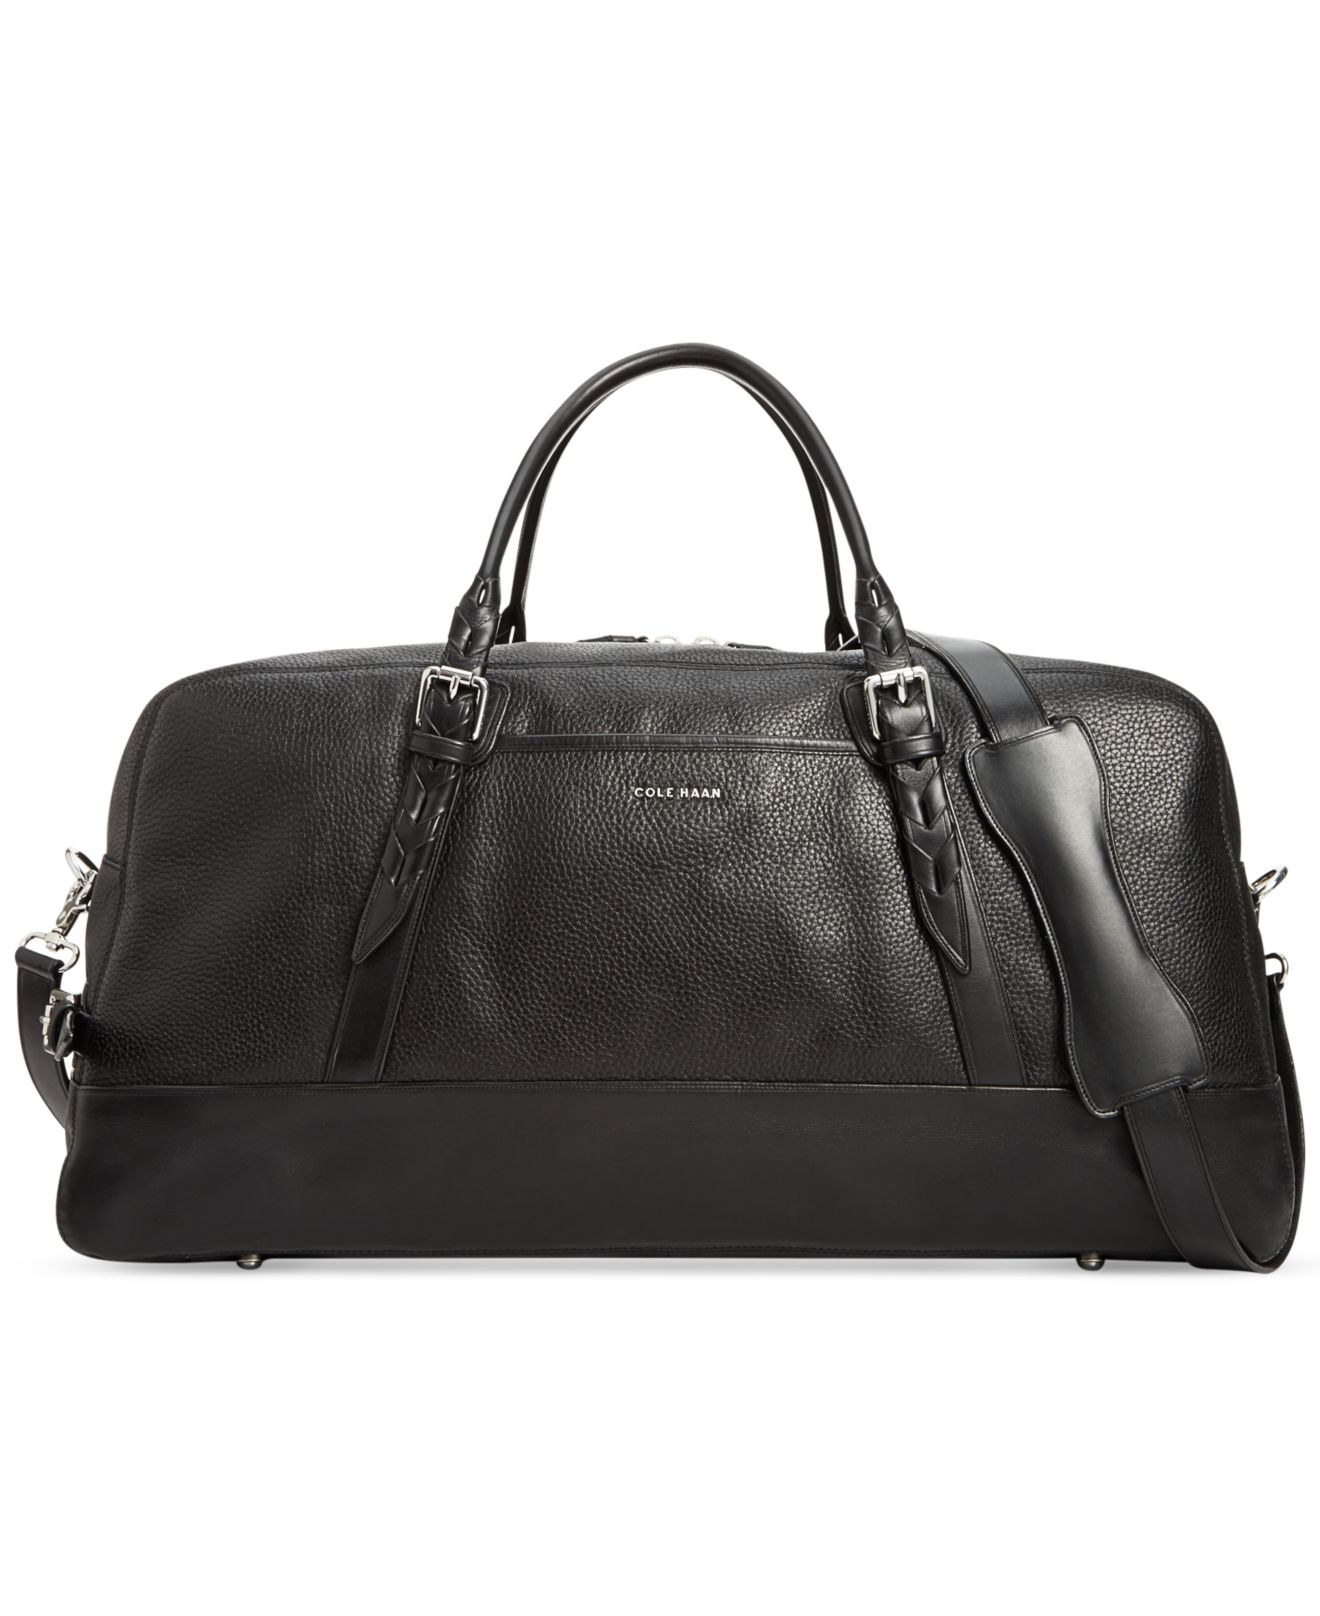 Lyst - Cole haan Pebbled Leather Duffle Bag in Black for Men